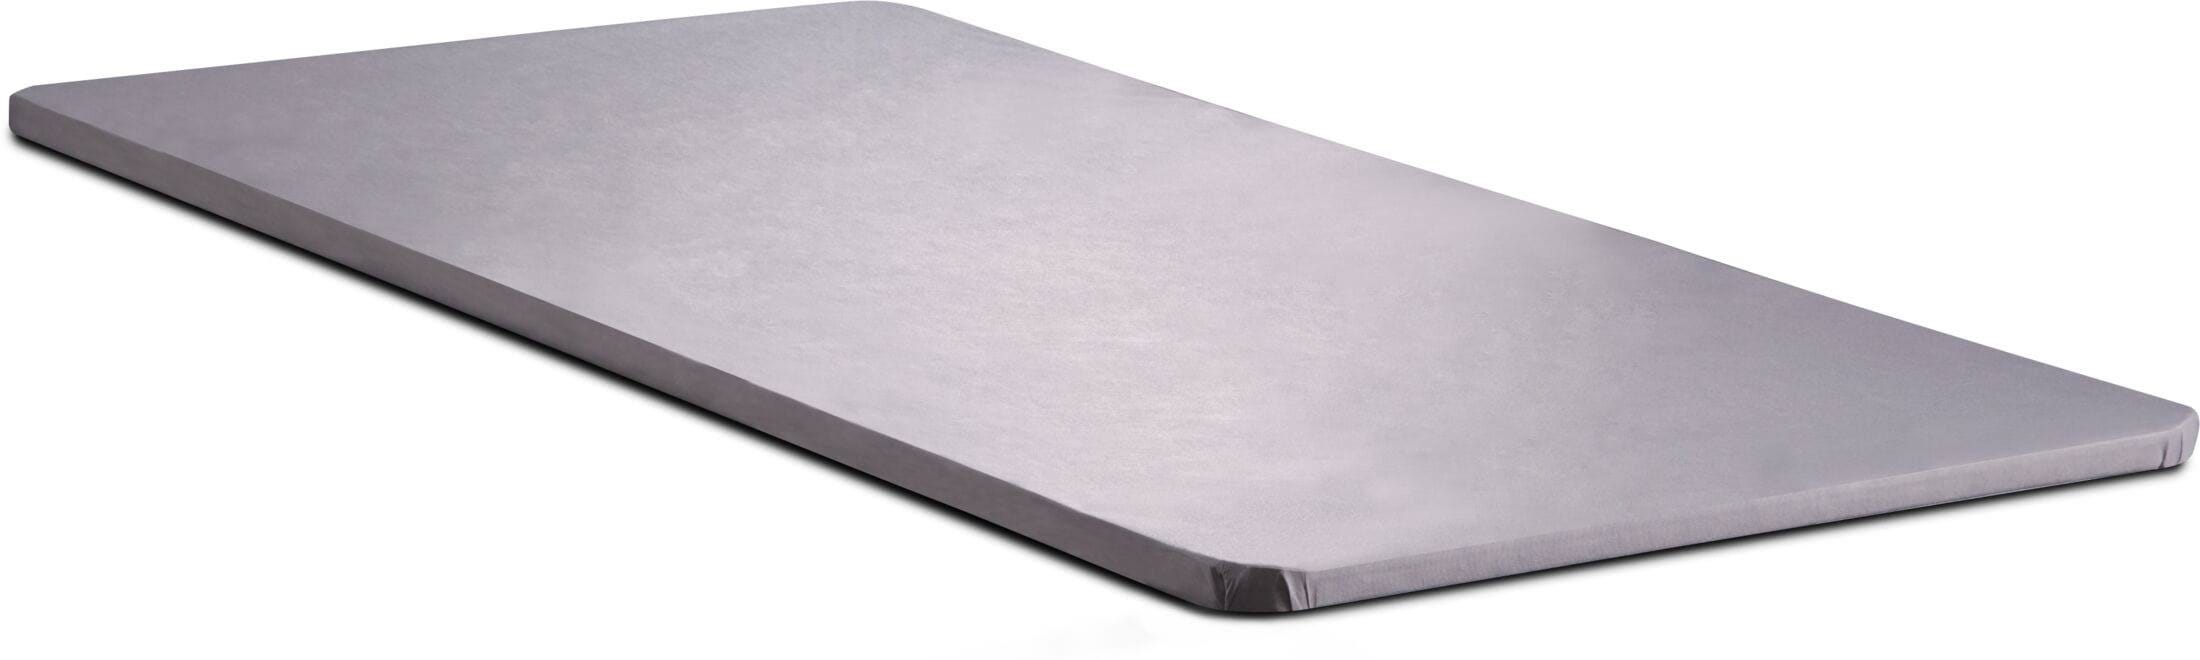 Solstice Twin XL Bunkie Board for Enhanced Mattress Support | Image